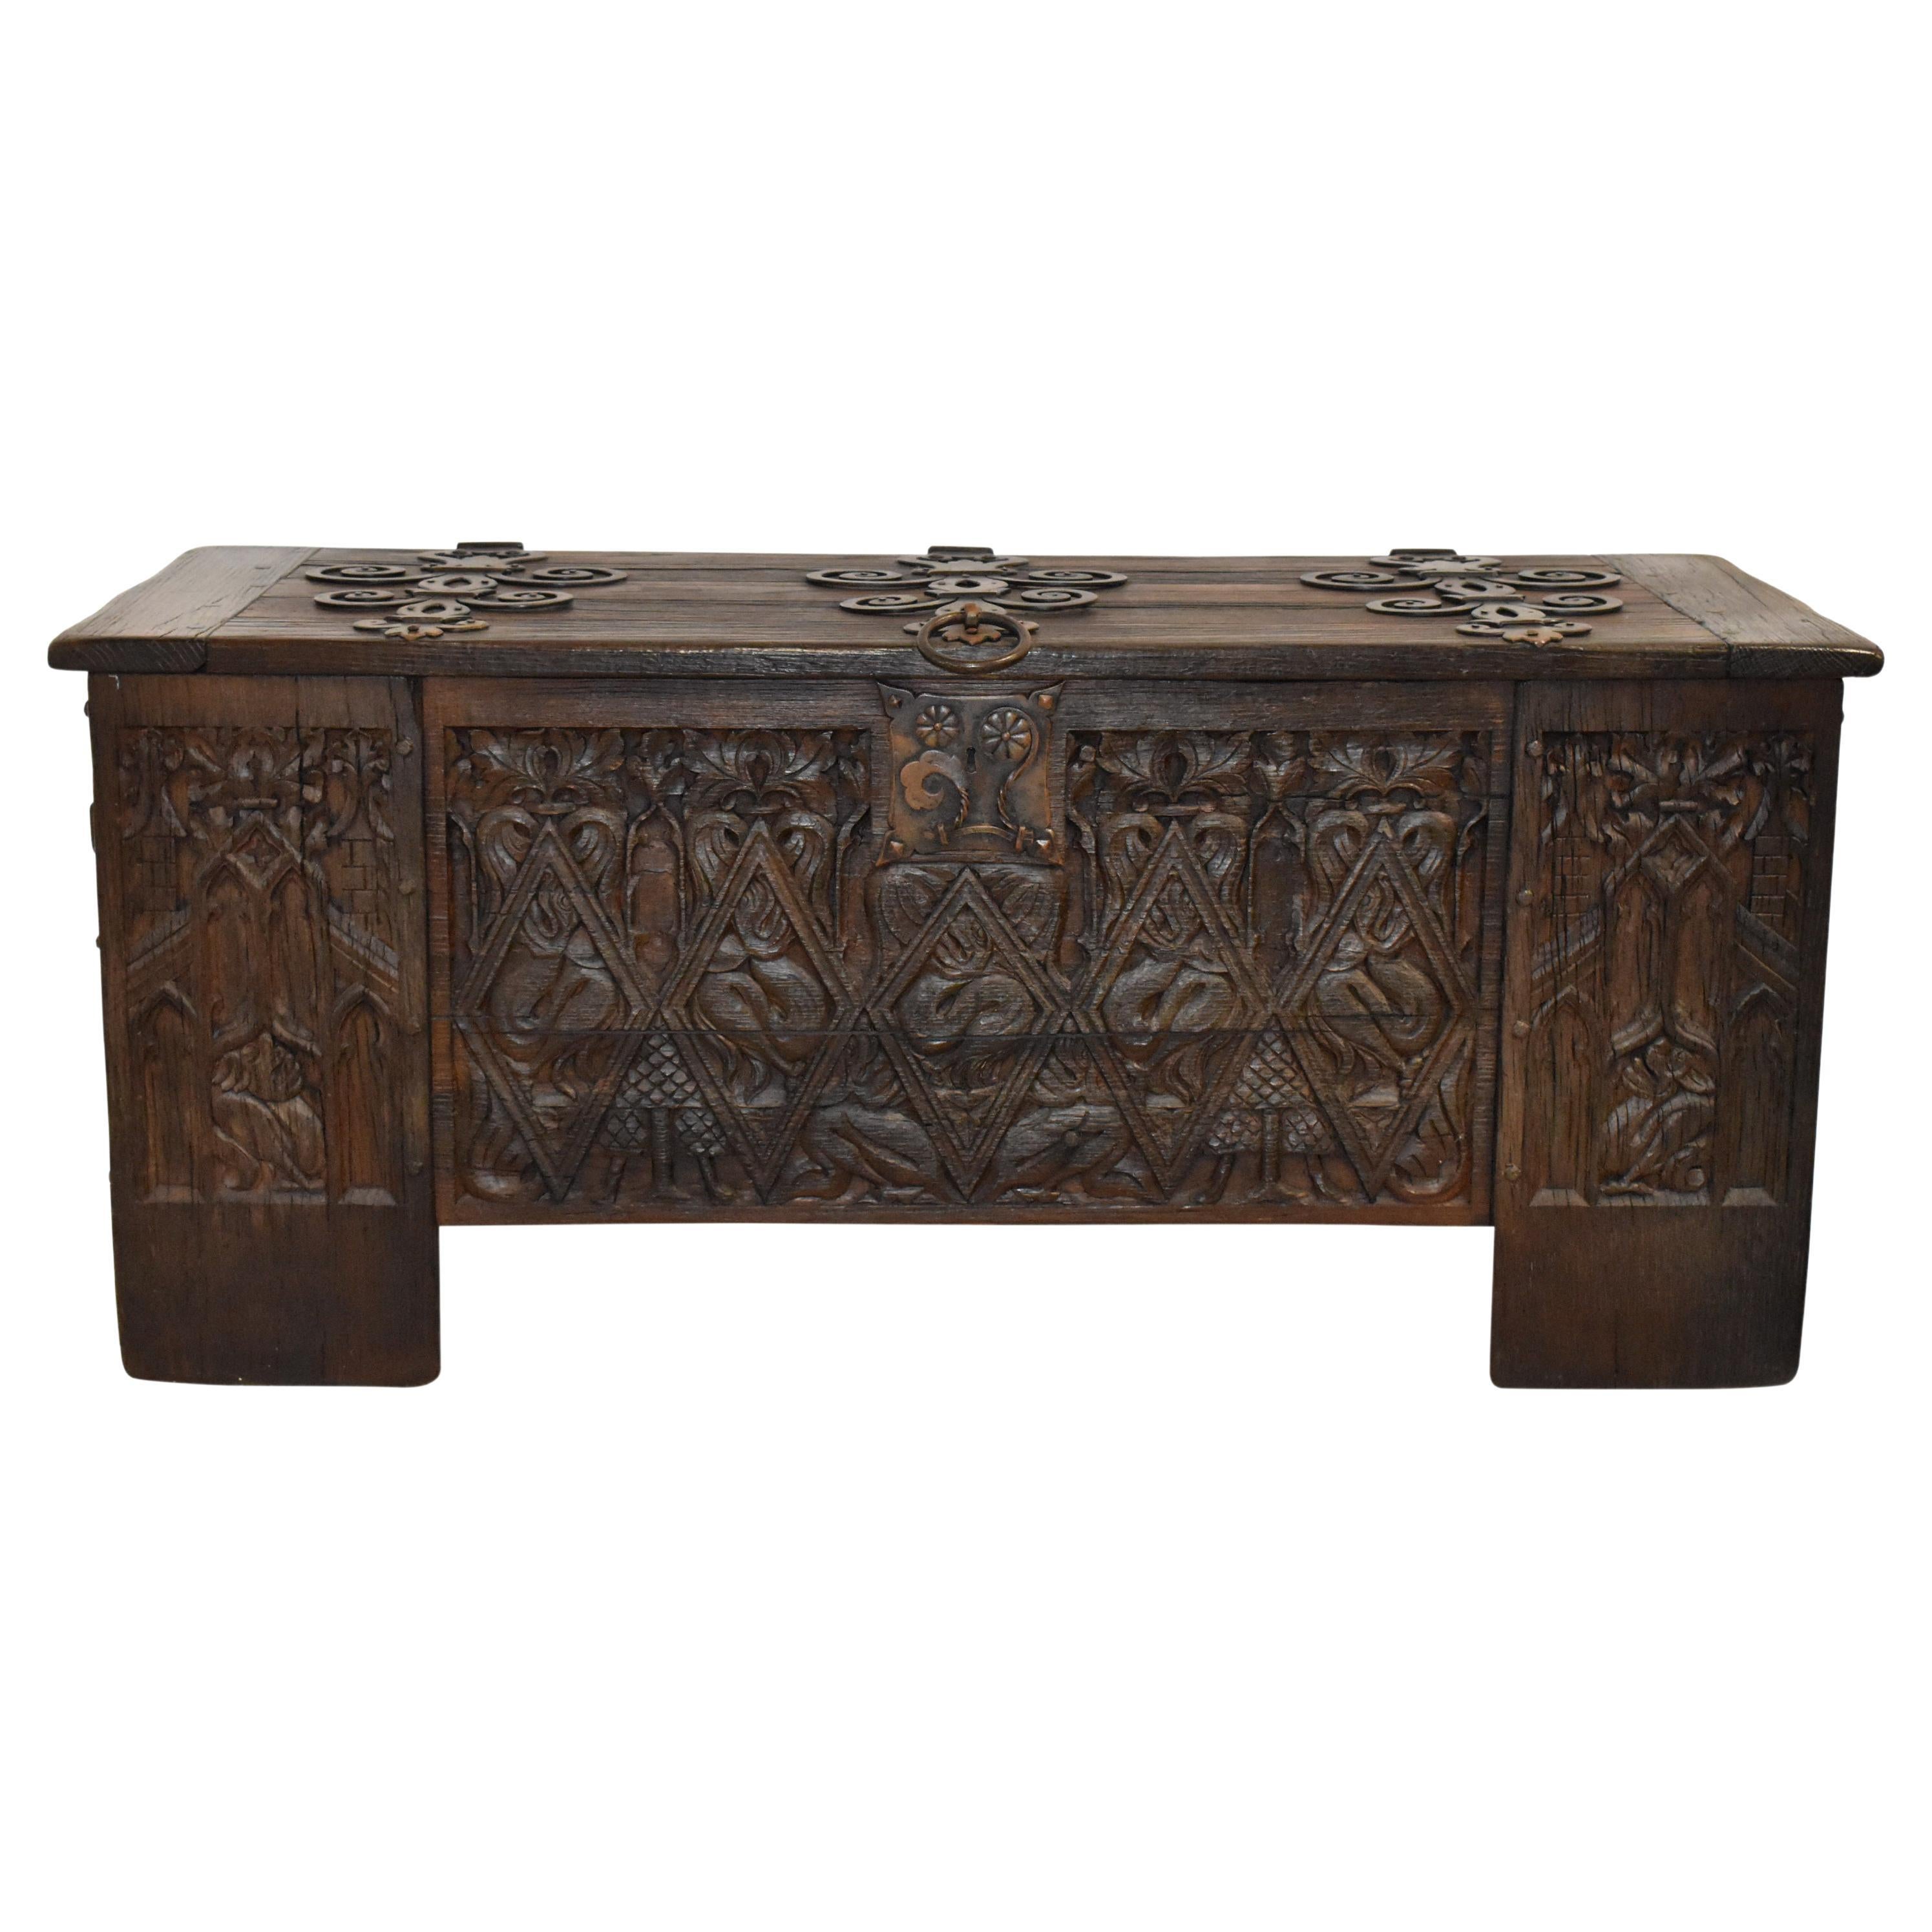 Substantial Carved Oak Trunk with Iron Accents For Sale